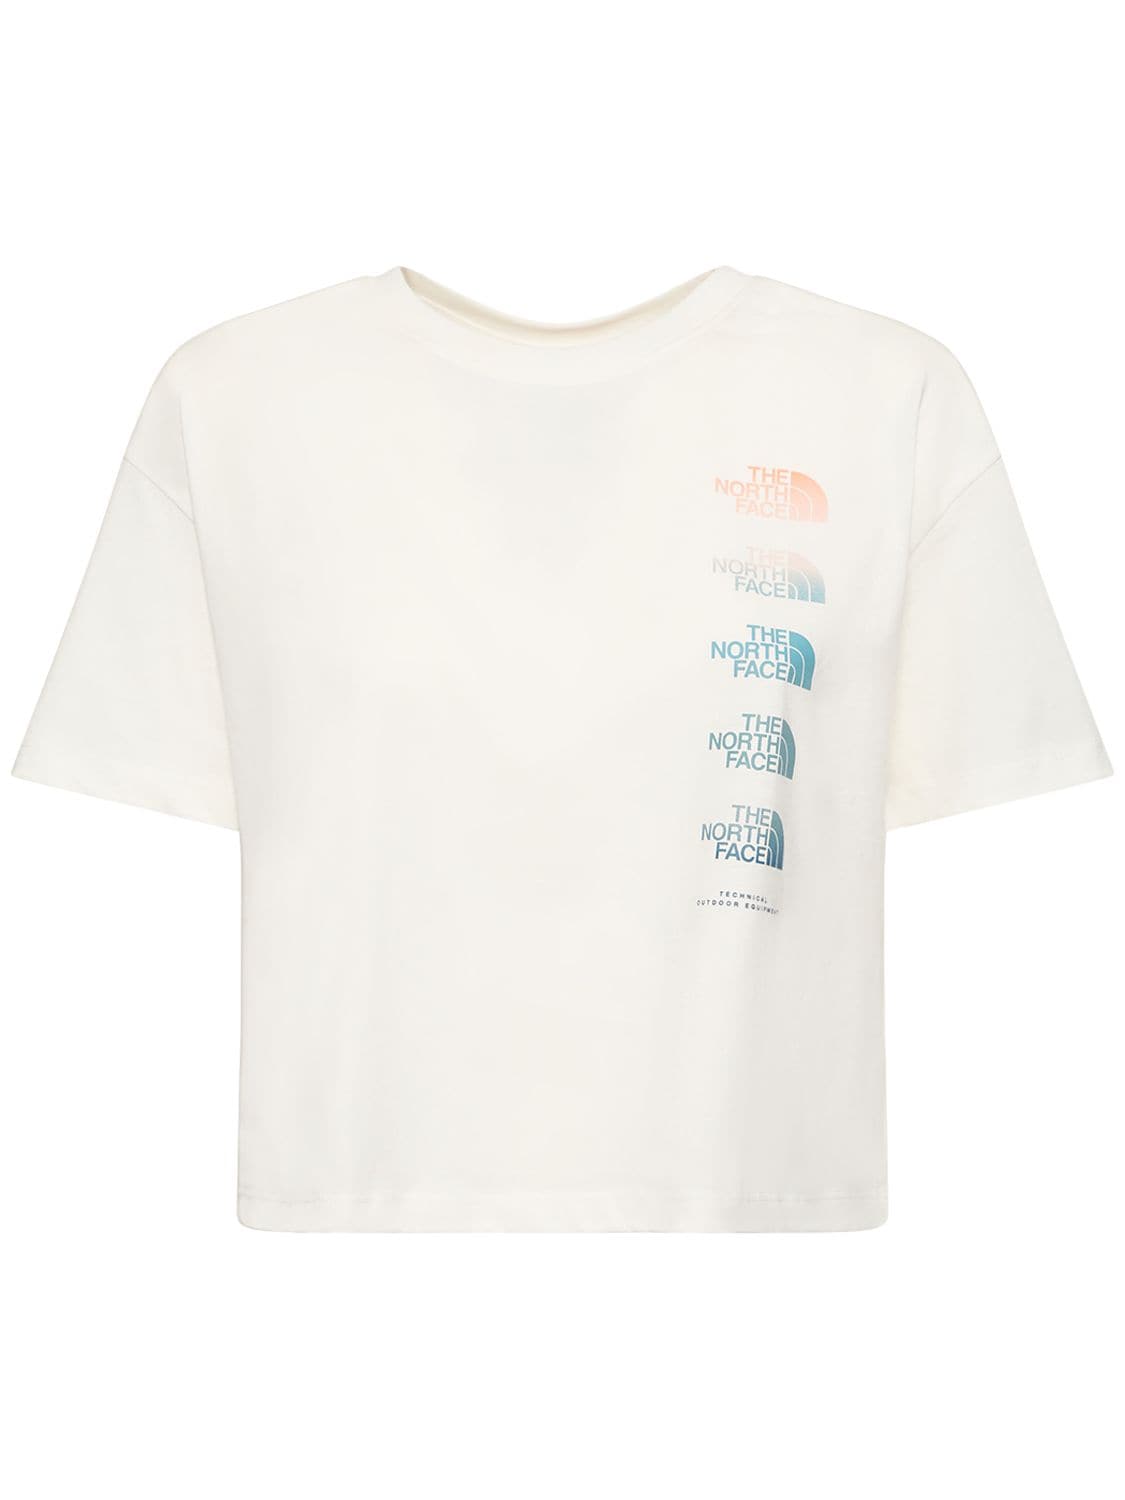 The North Face Graphic Crop Jersey T-shirt In White